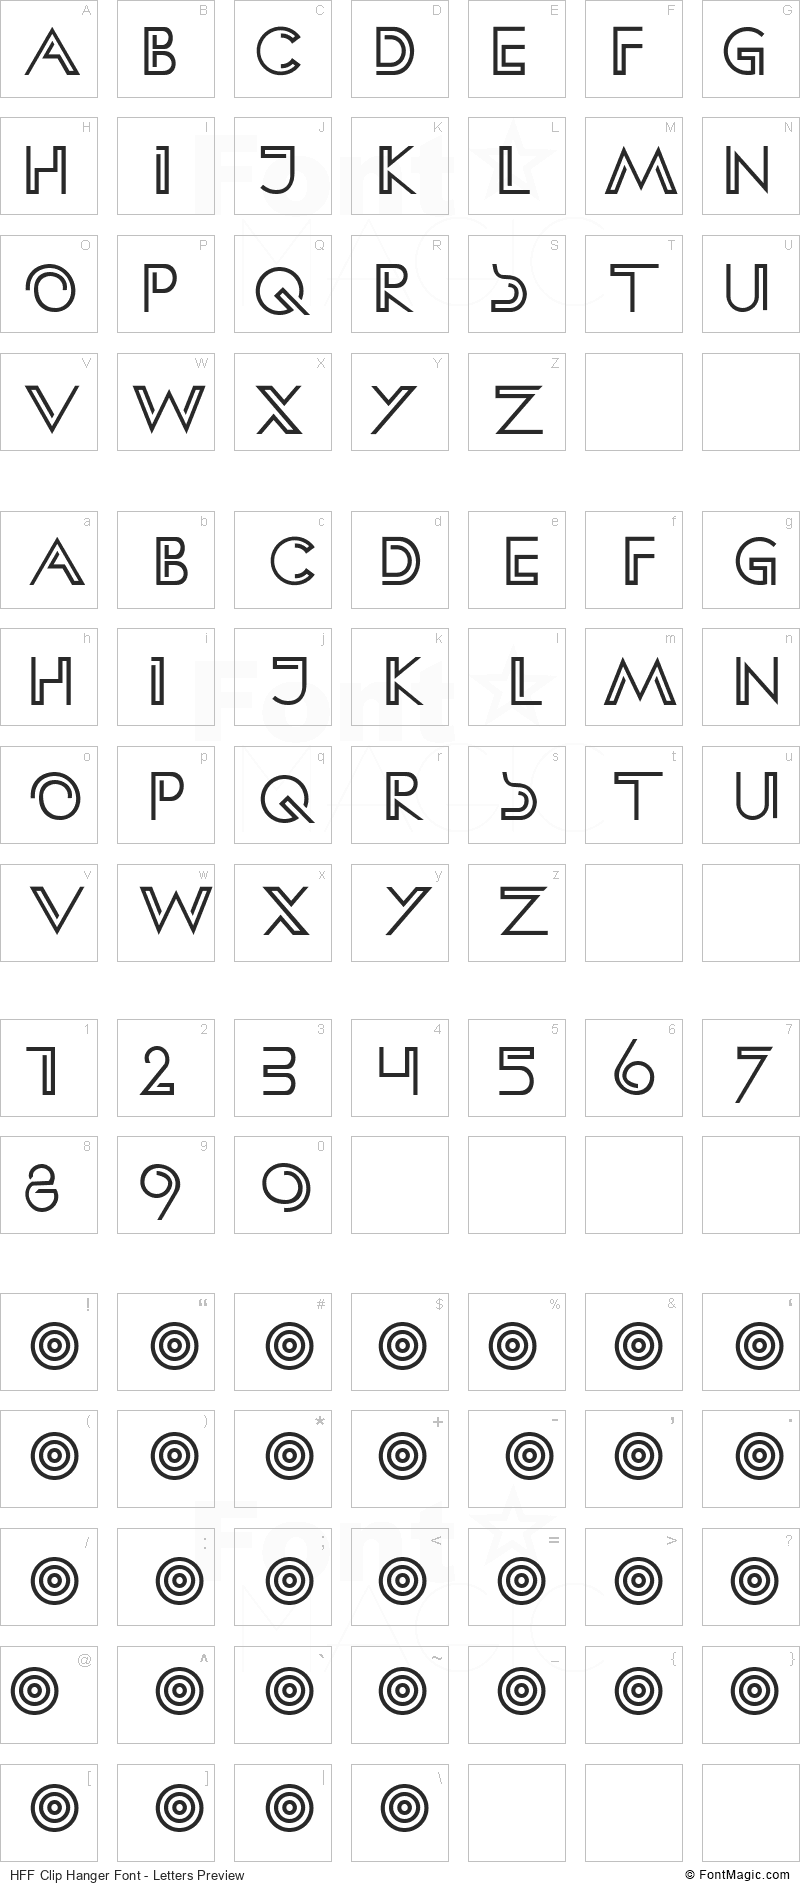 HFF Clip Hanger Font - All Latters Preview Chart